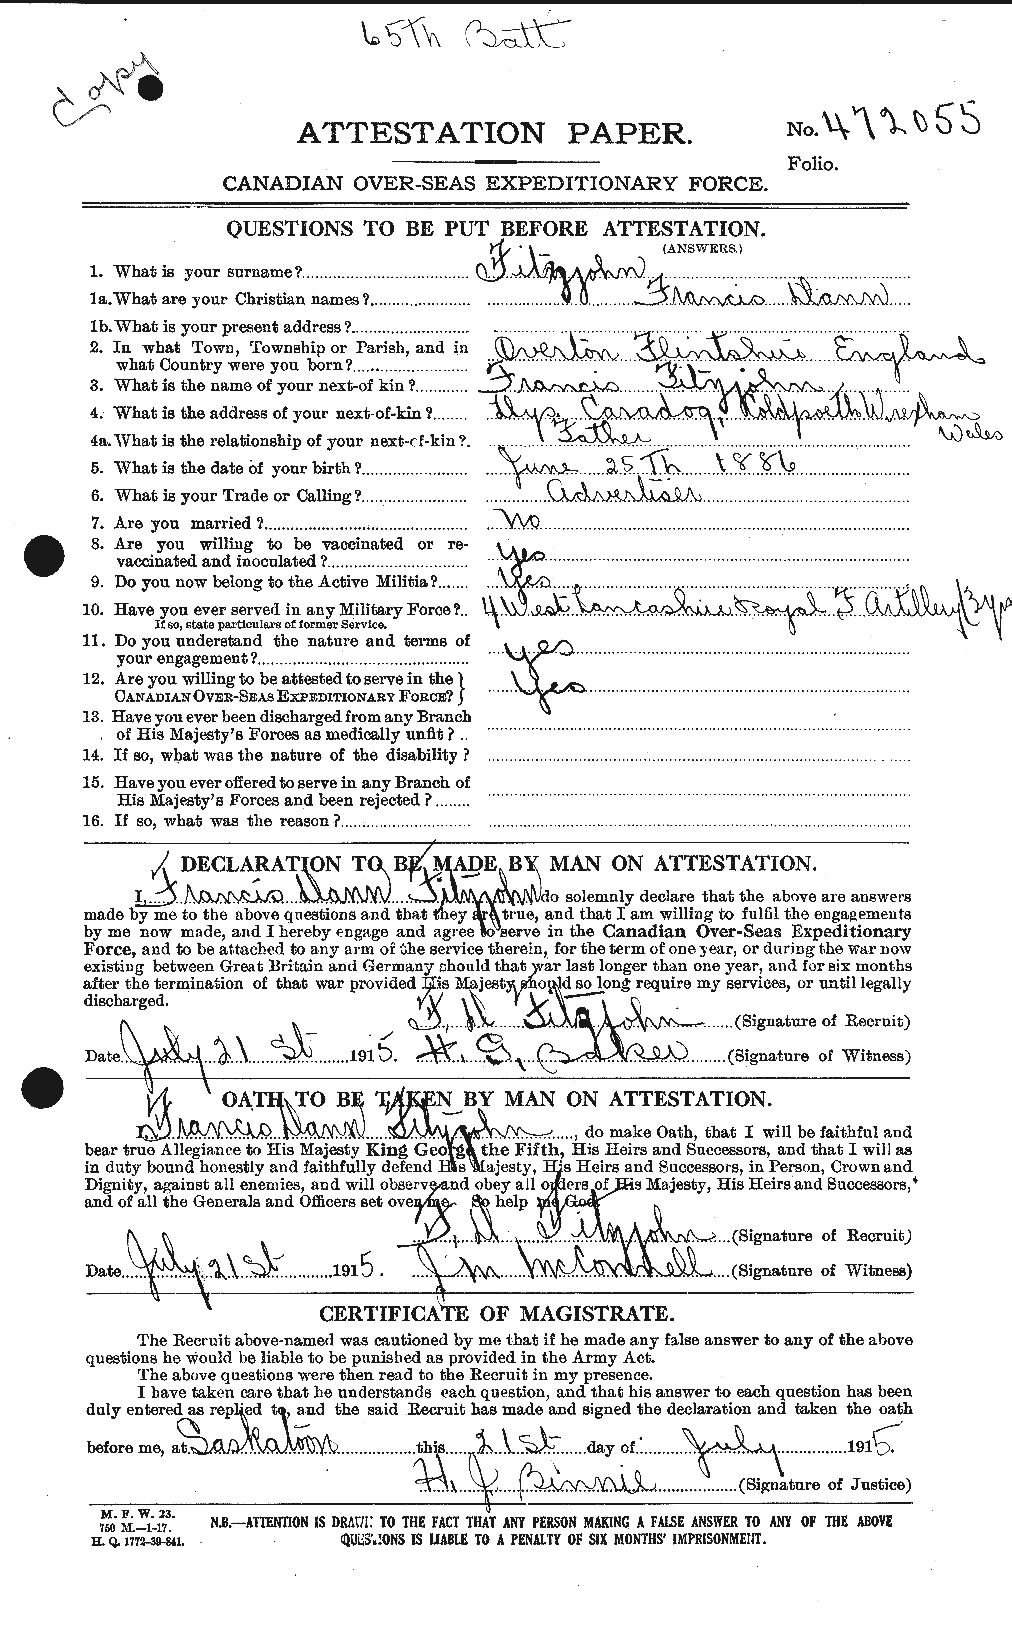 Personnel Records of the First World War - CEF 326734a